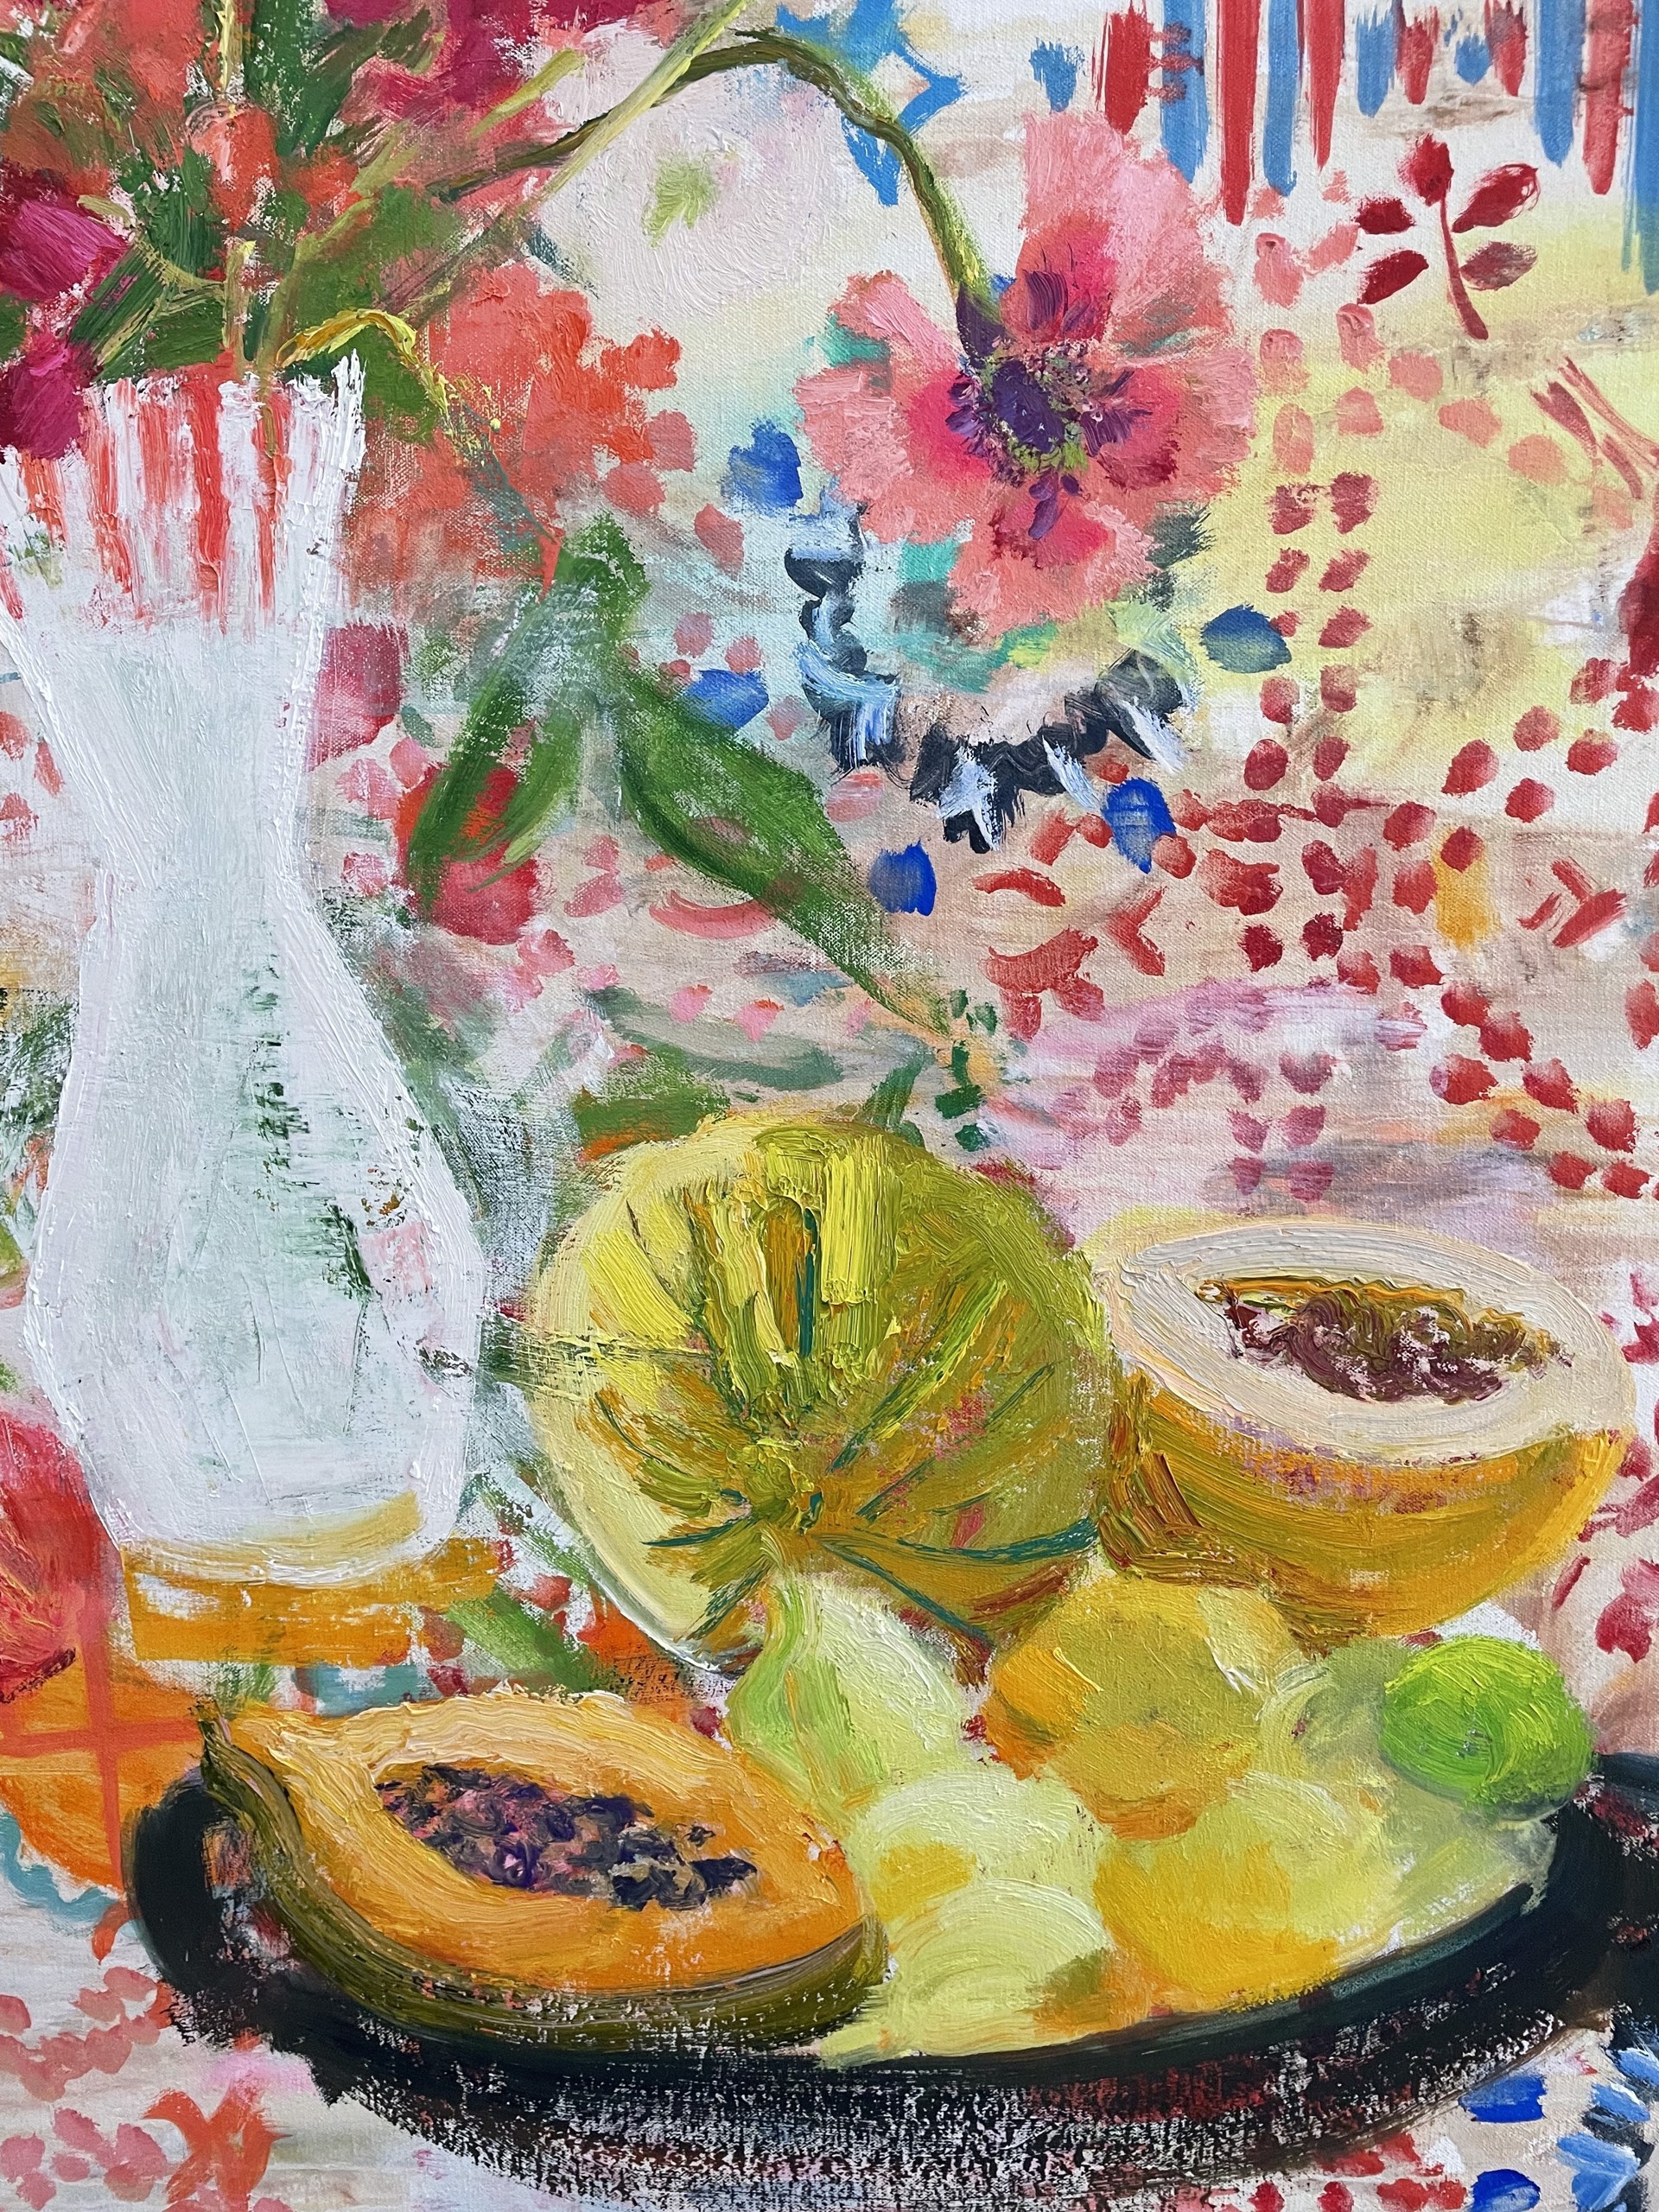 Seeds and Citrus by Melanie Parke